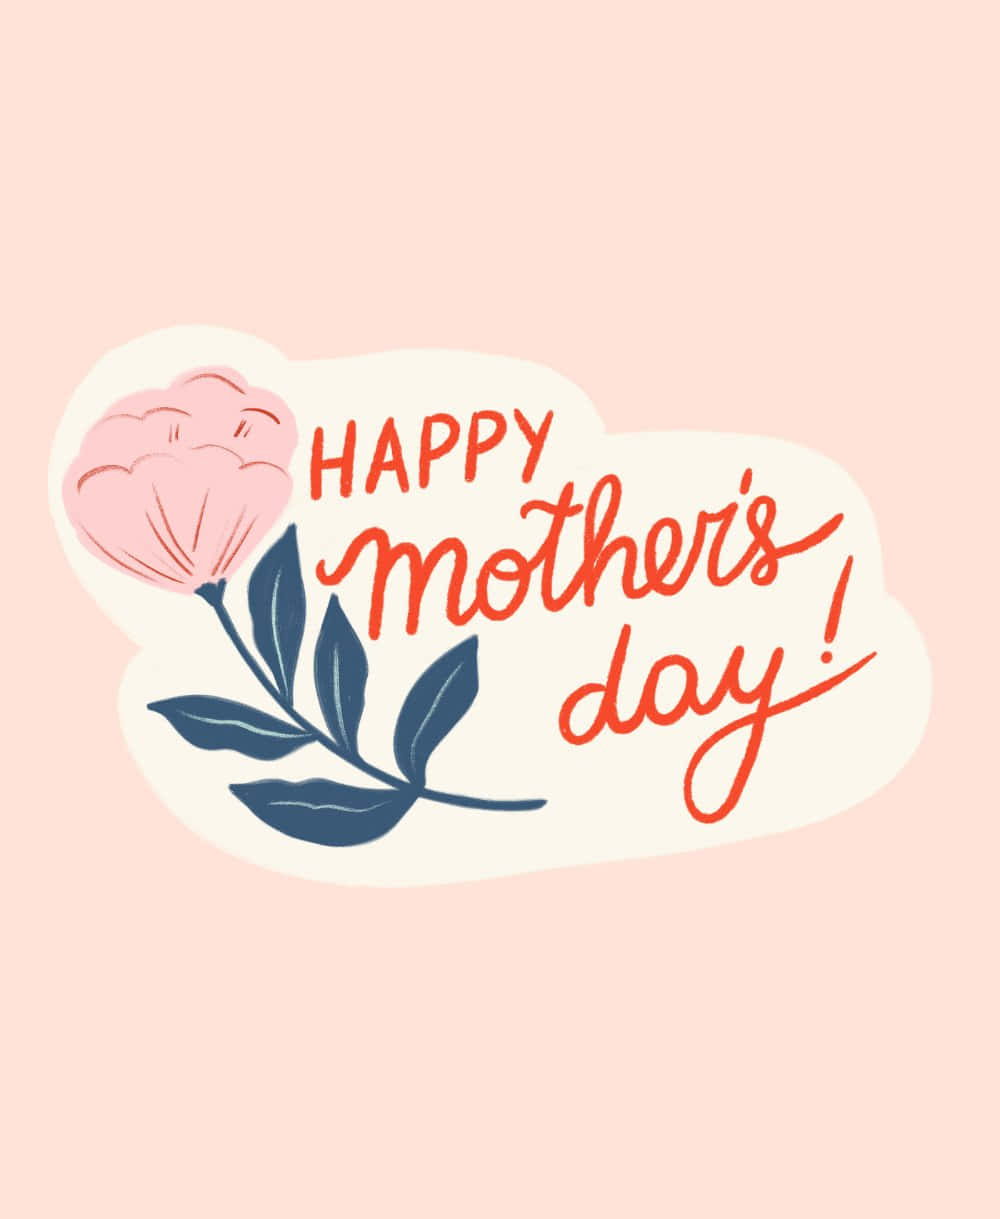 Happy Mothers Day Card With A Flower